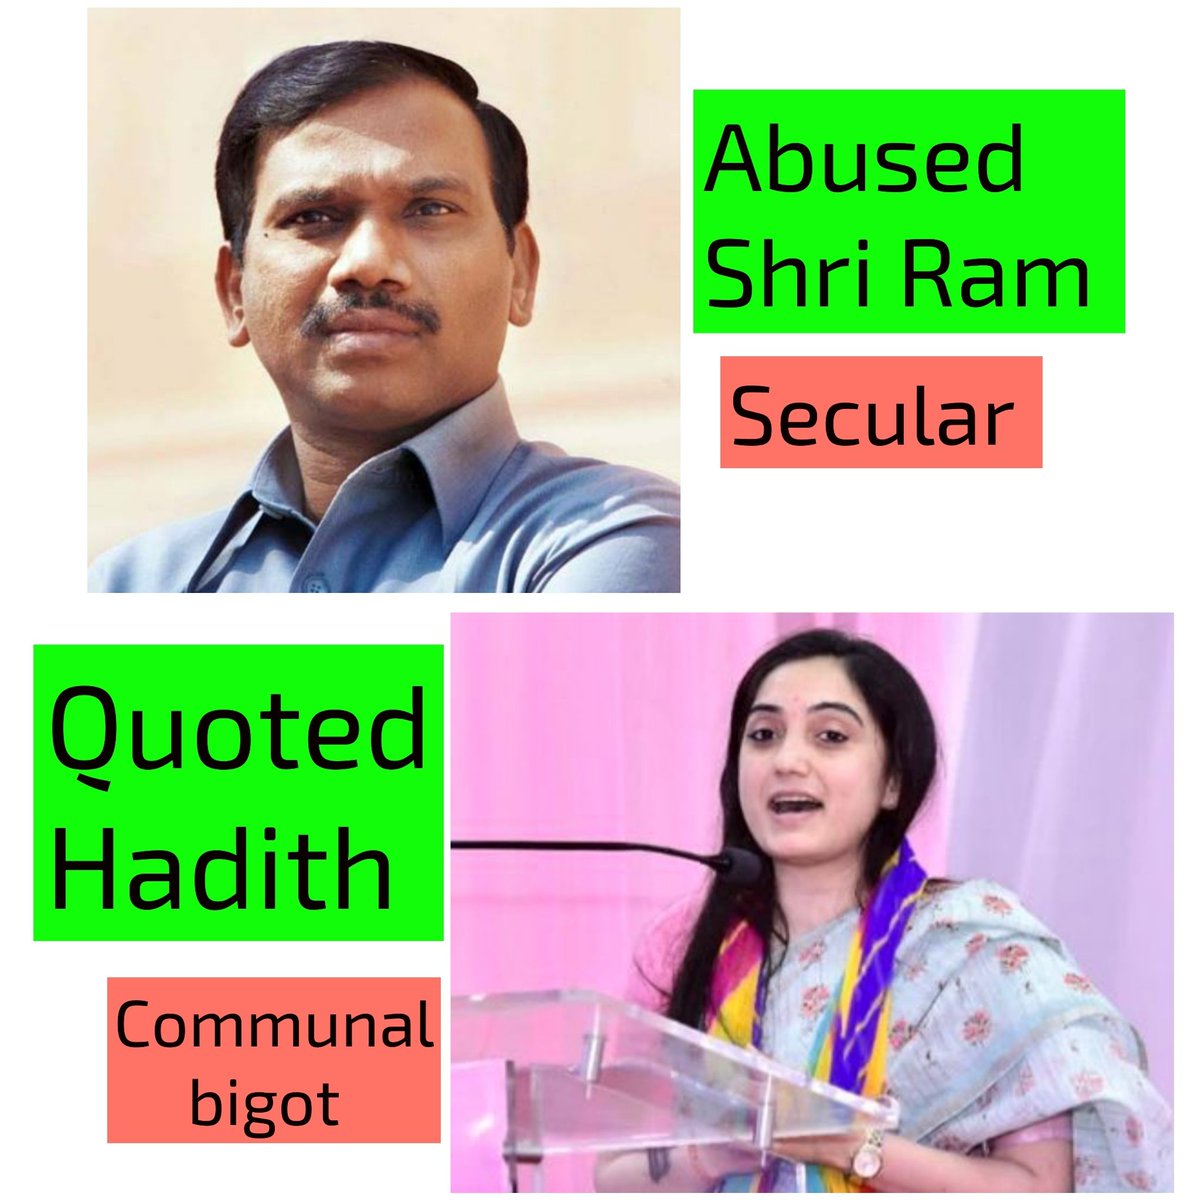 -Nupur Sharma Quoting Hadith : Criminal Offense, need to put behind the bars, STSJ is also justified 

-A Raja abusing Prabhu Shri Ram : Freedom of Speech

Bloody secularism!!